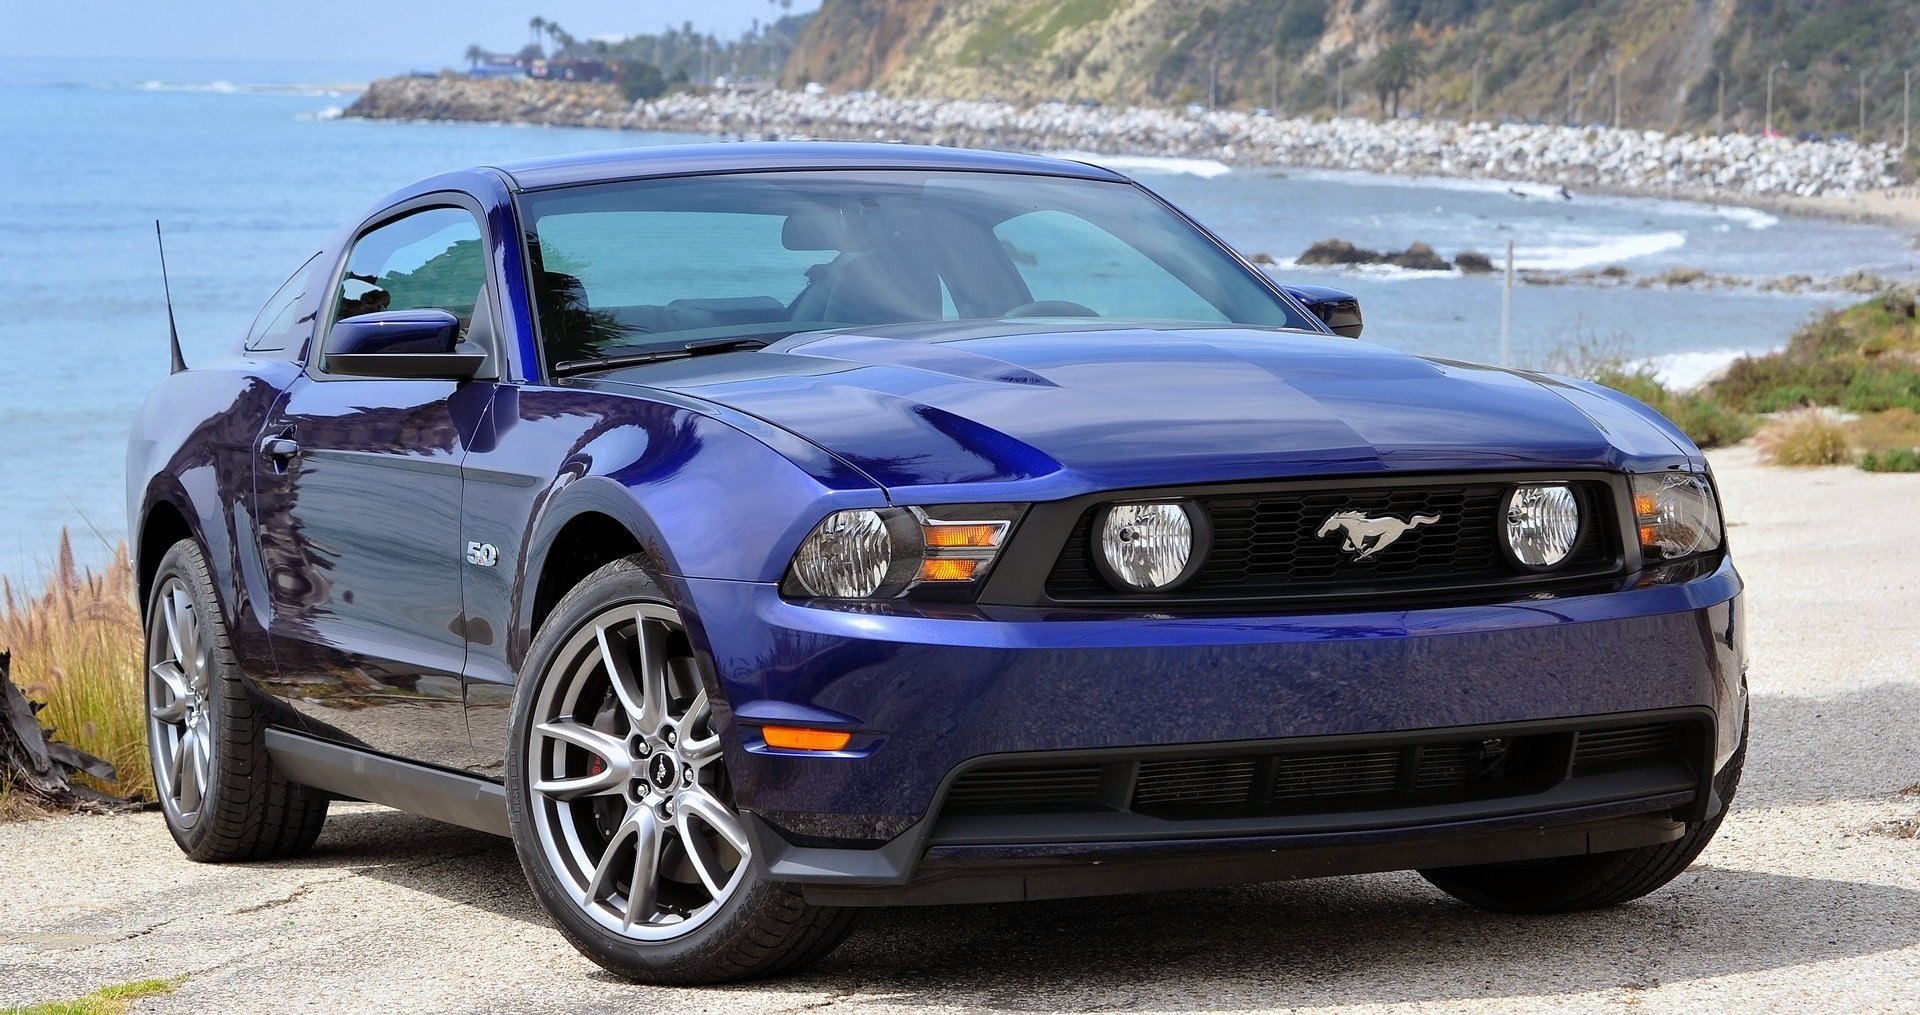 The Coyote engine debuted with the 2011 Mustang GT